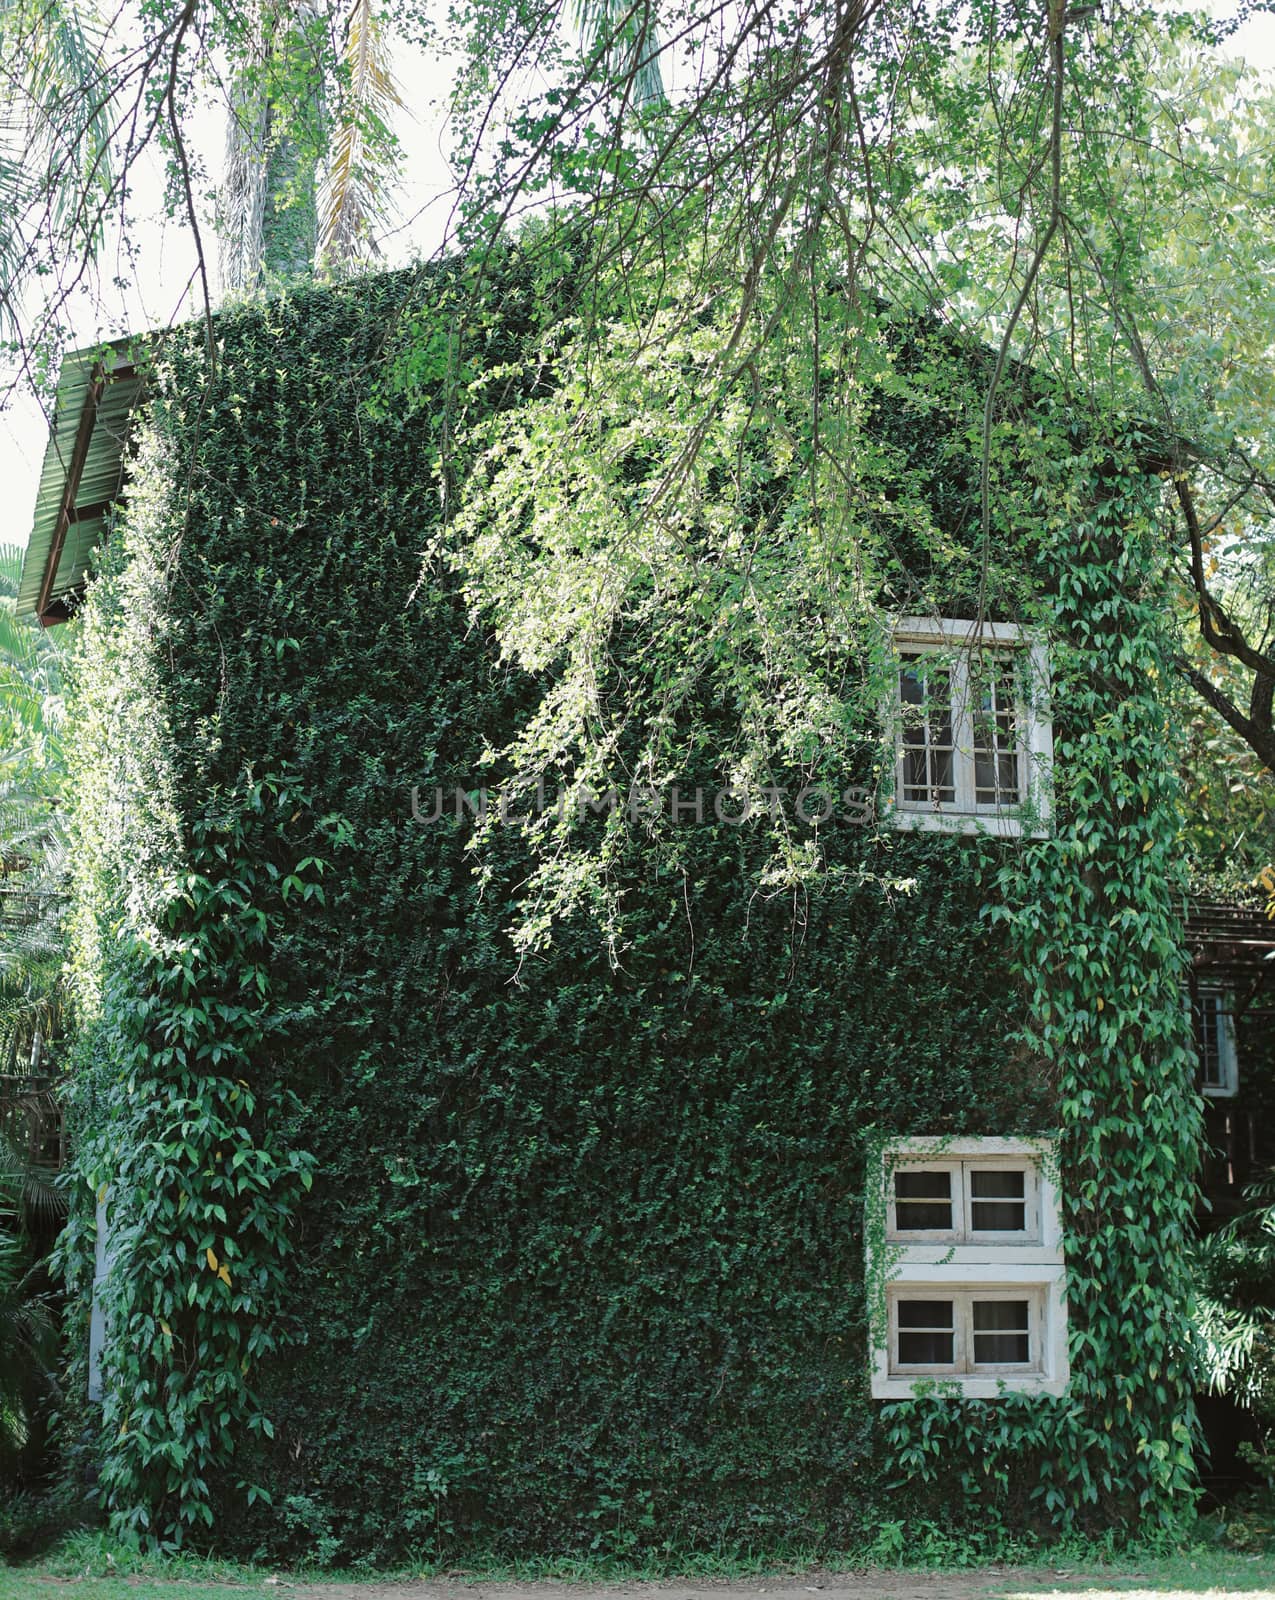 Old building house covered with green ivy plant, spring and natu by nuchylee